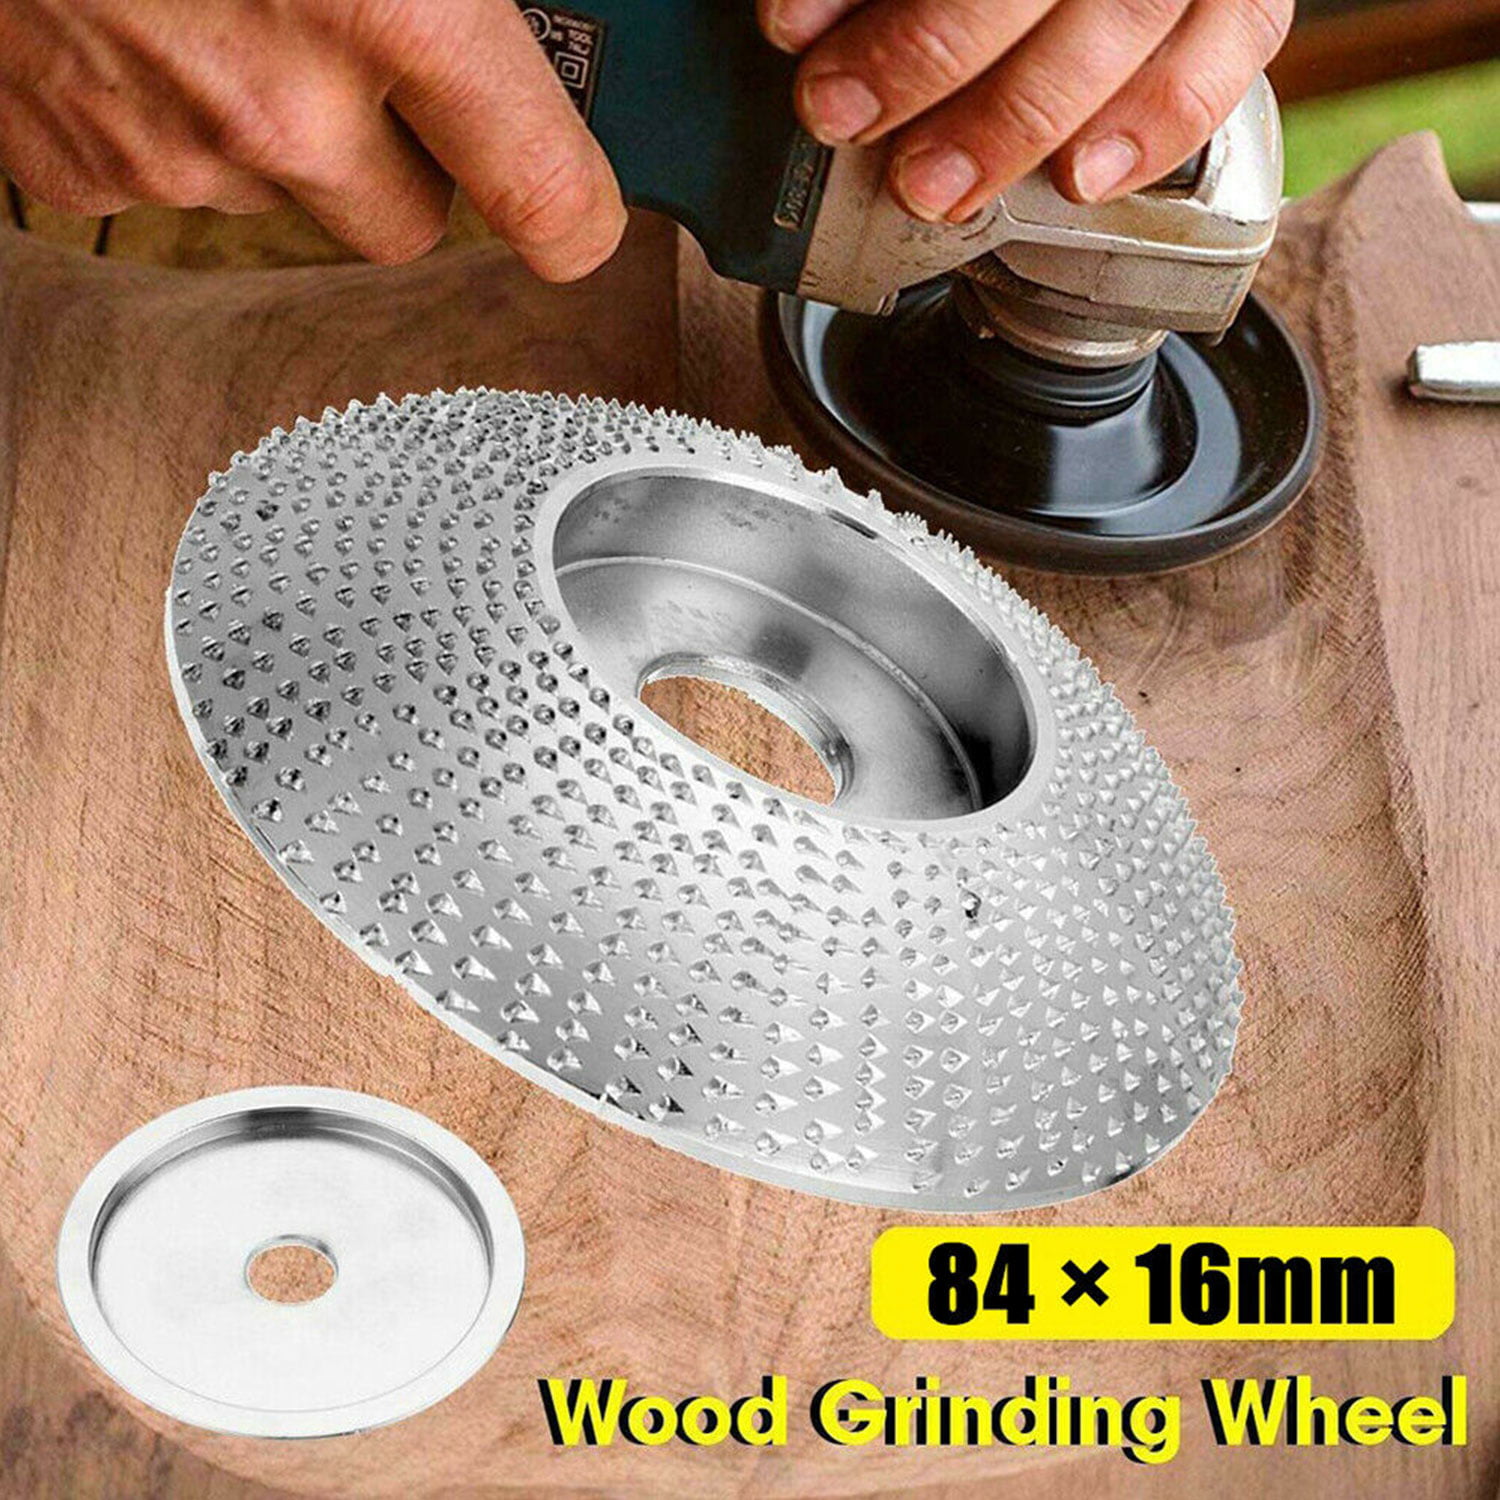 1x Carbide Wood Sanding Carving Shaping Disc Angle Grinder Grinding Wheels 